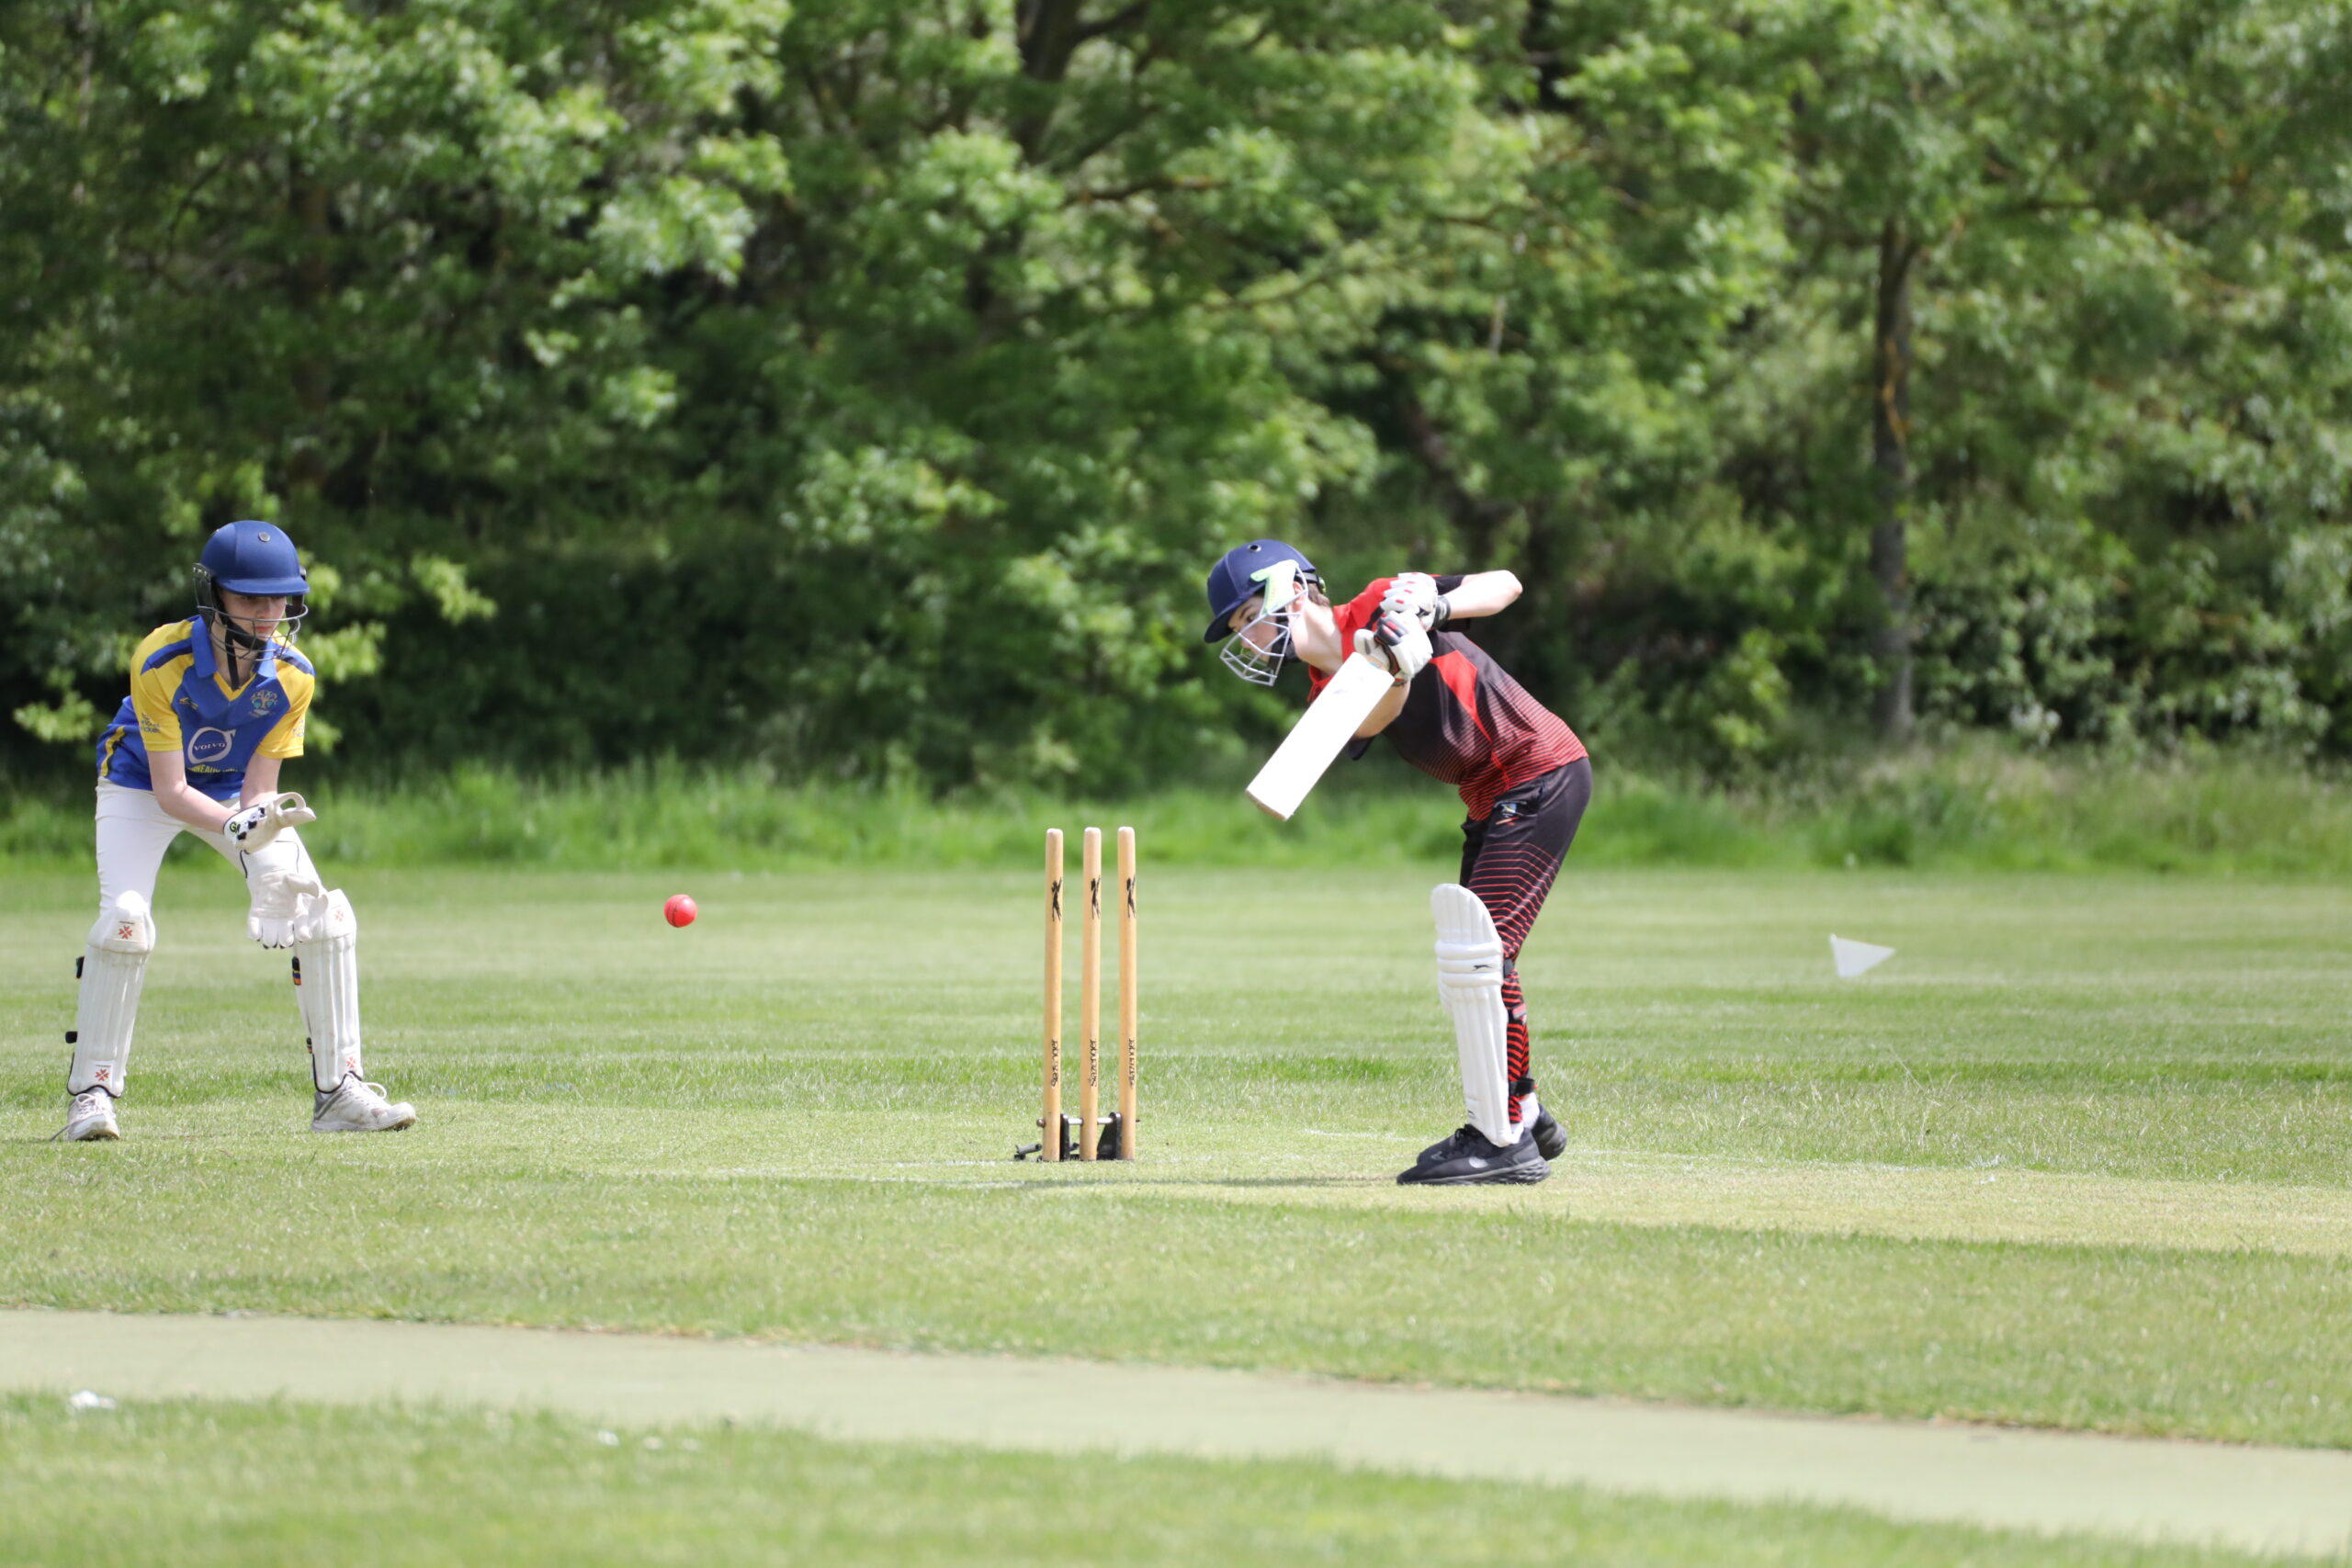 Ben isaacs batting for Guildford City Cricket Youth Project